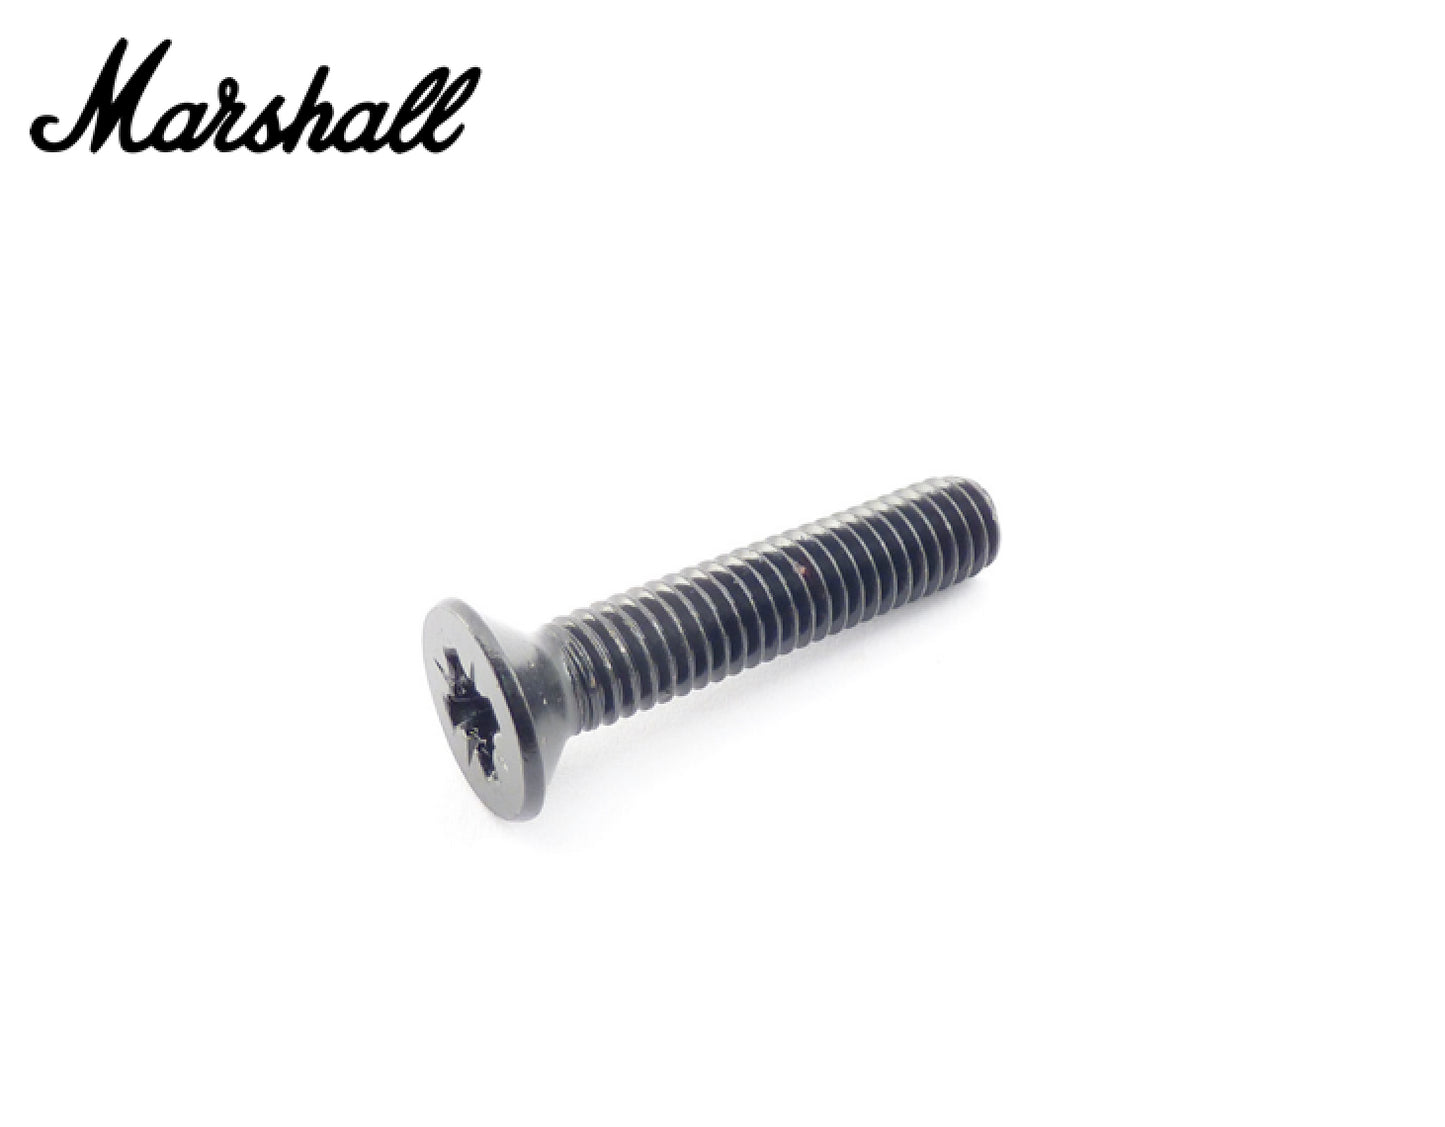 Marshall® Amplifier Chassis Screw M6 x 25mm